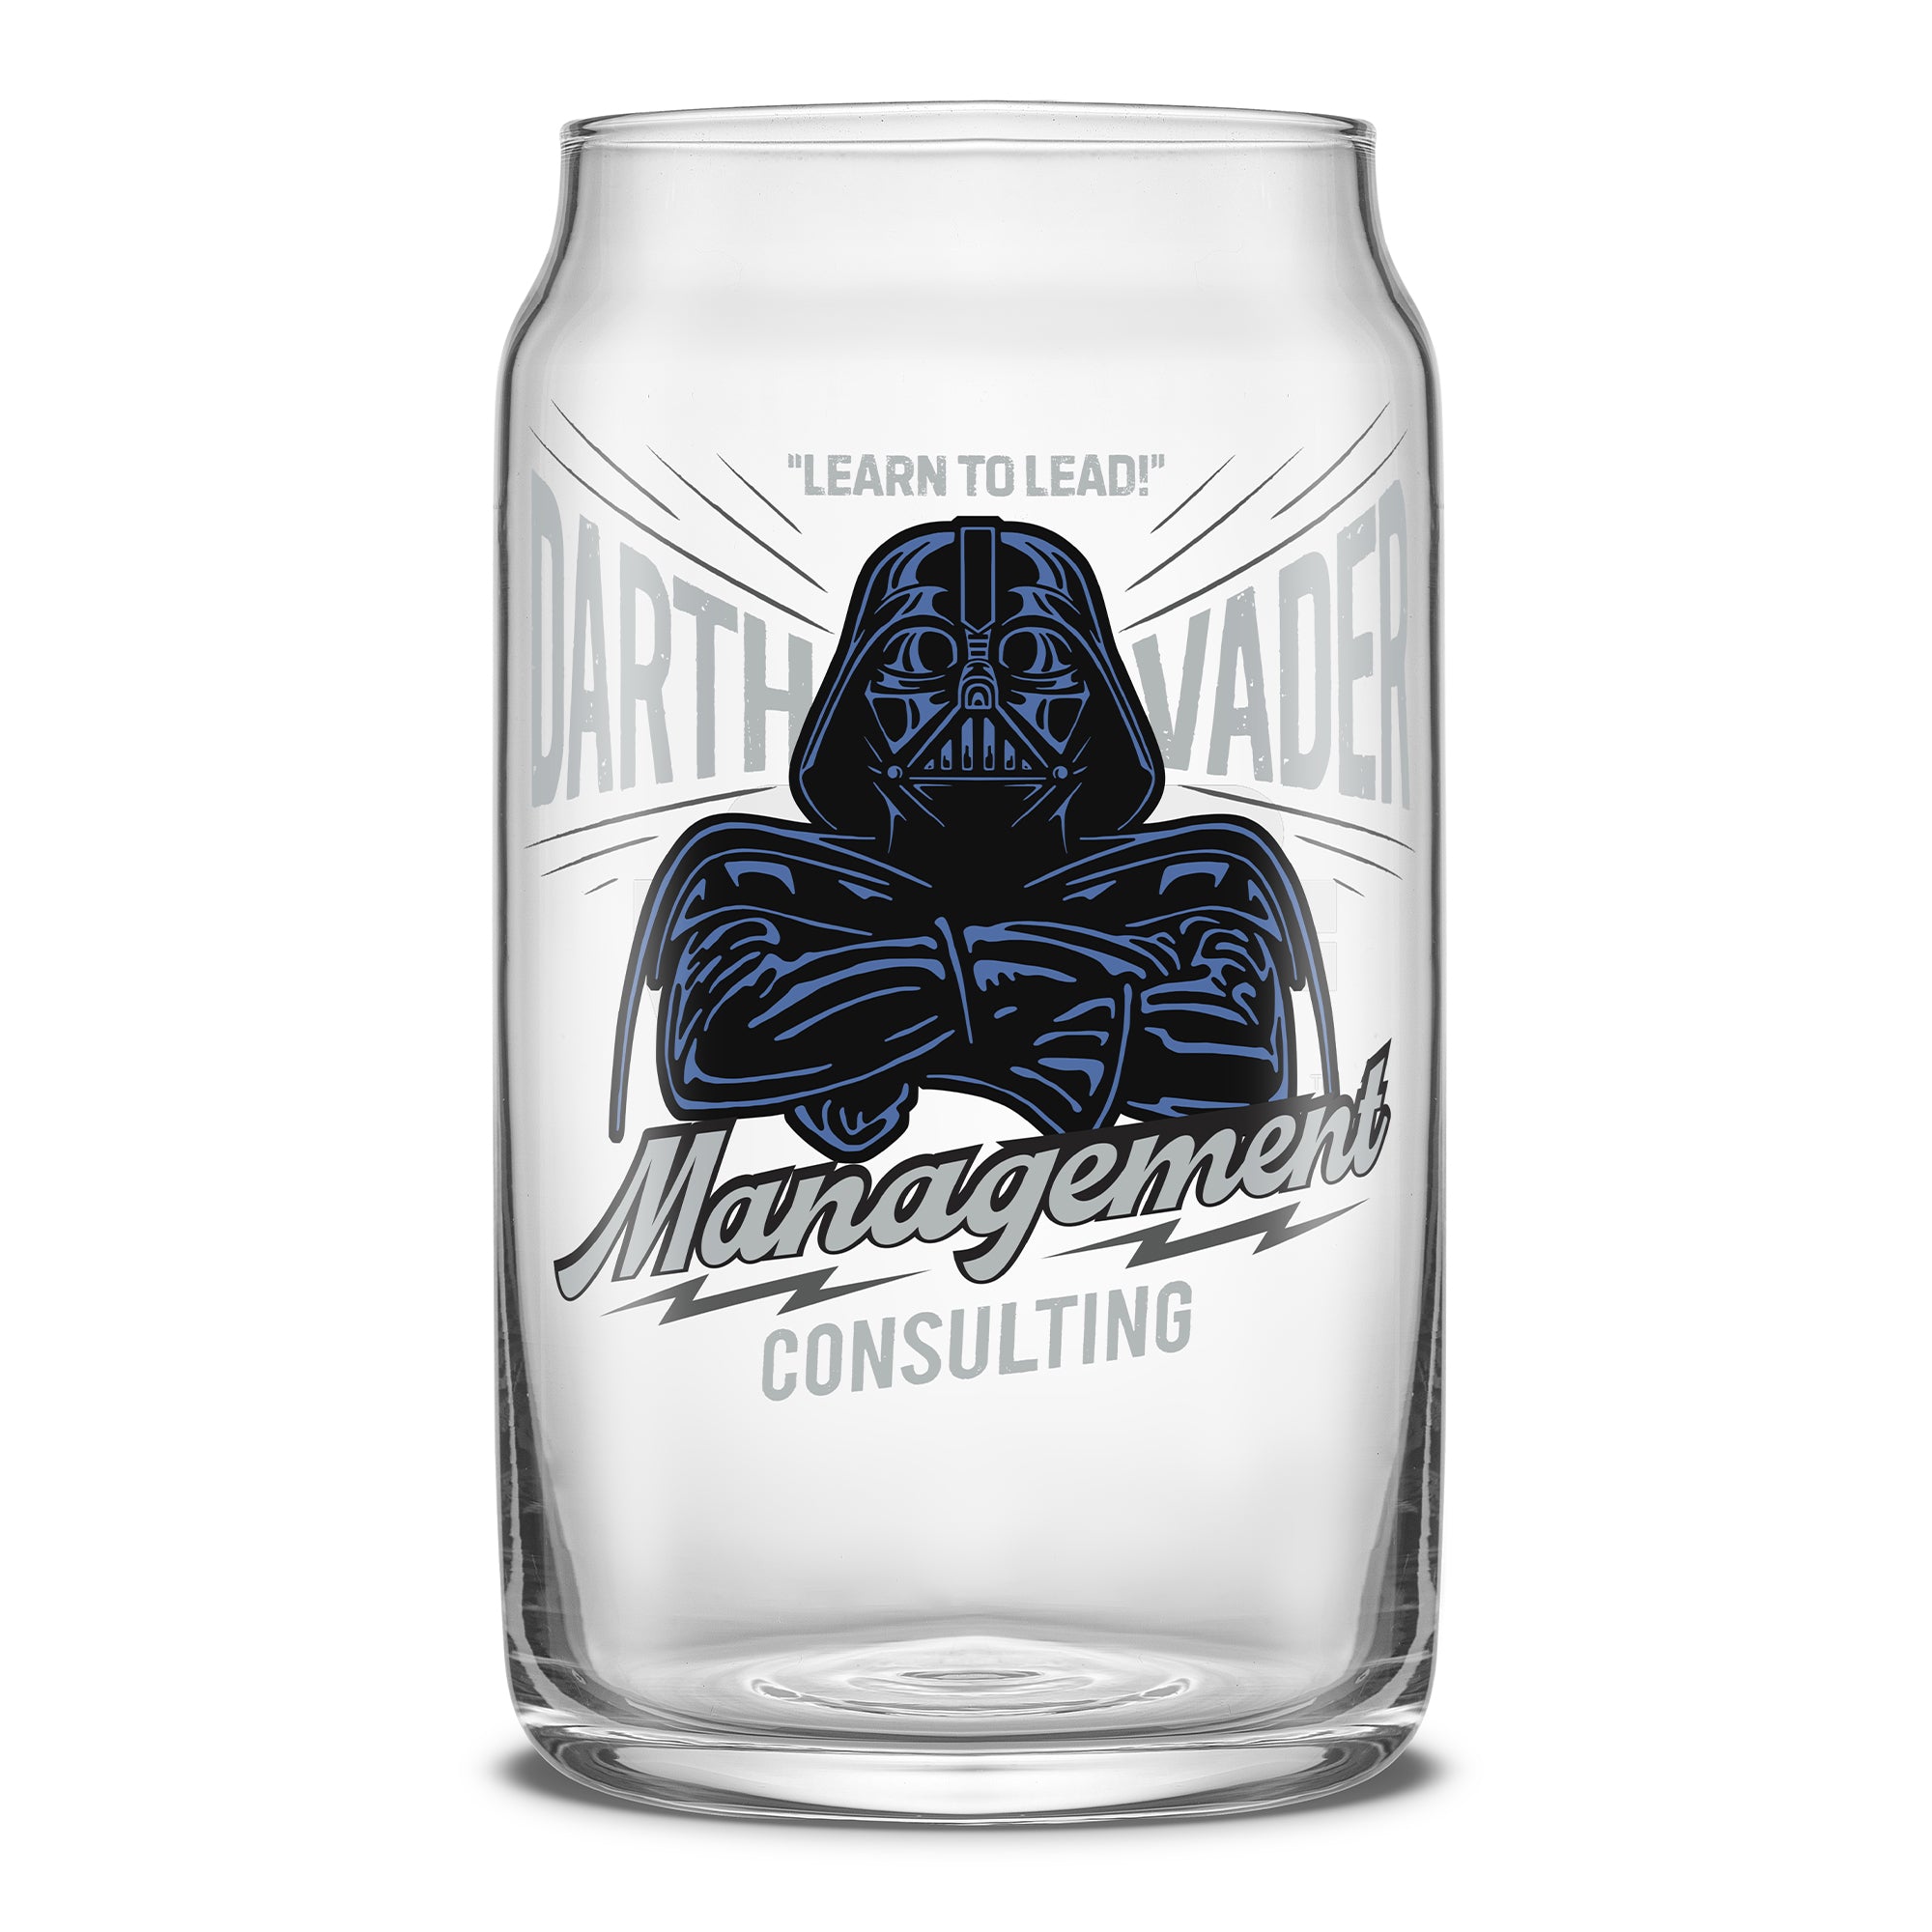 Retro-inspired Star Wars can-shaped drinking glasses featuring Darth Vadar Management Consulting.